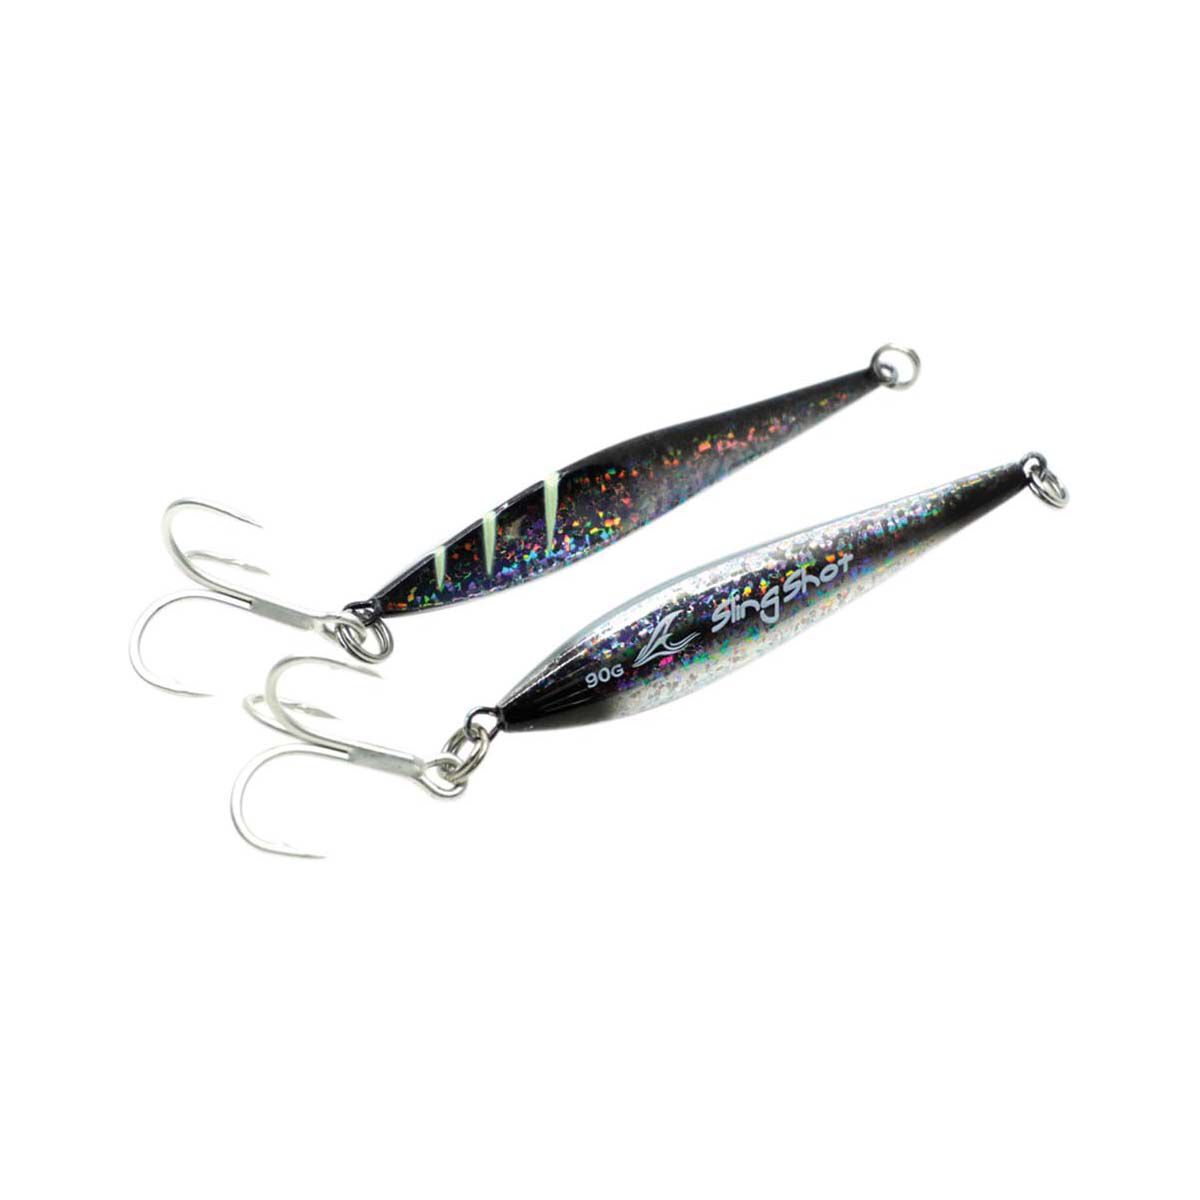 Casting Lures and Metal Lures For Sale Online Australia